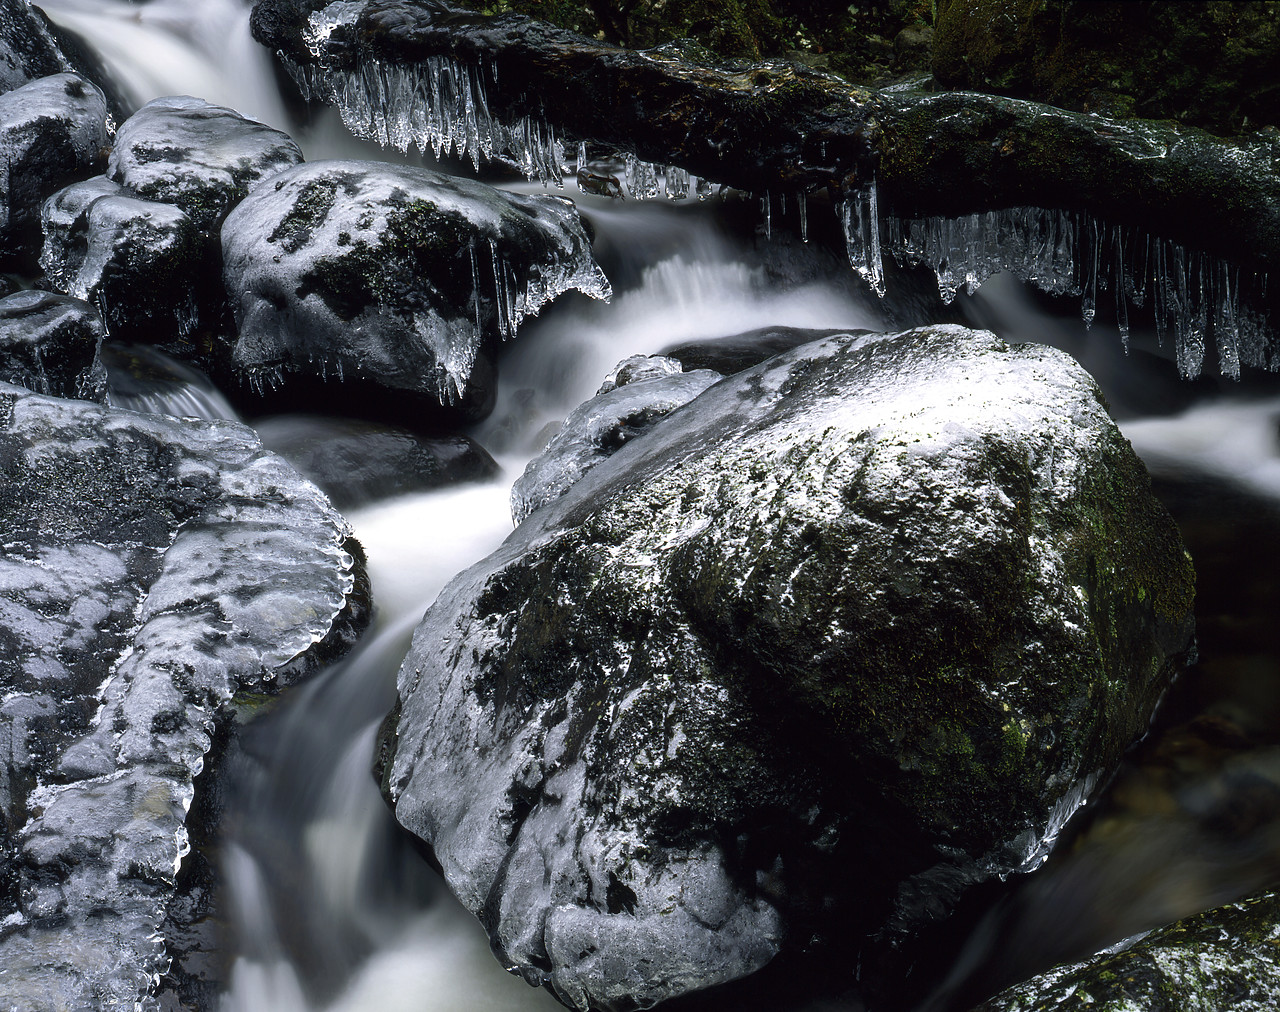 #030015-1 - Icy Stream, Lake District National Park, Cumbria, England